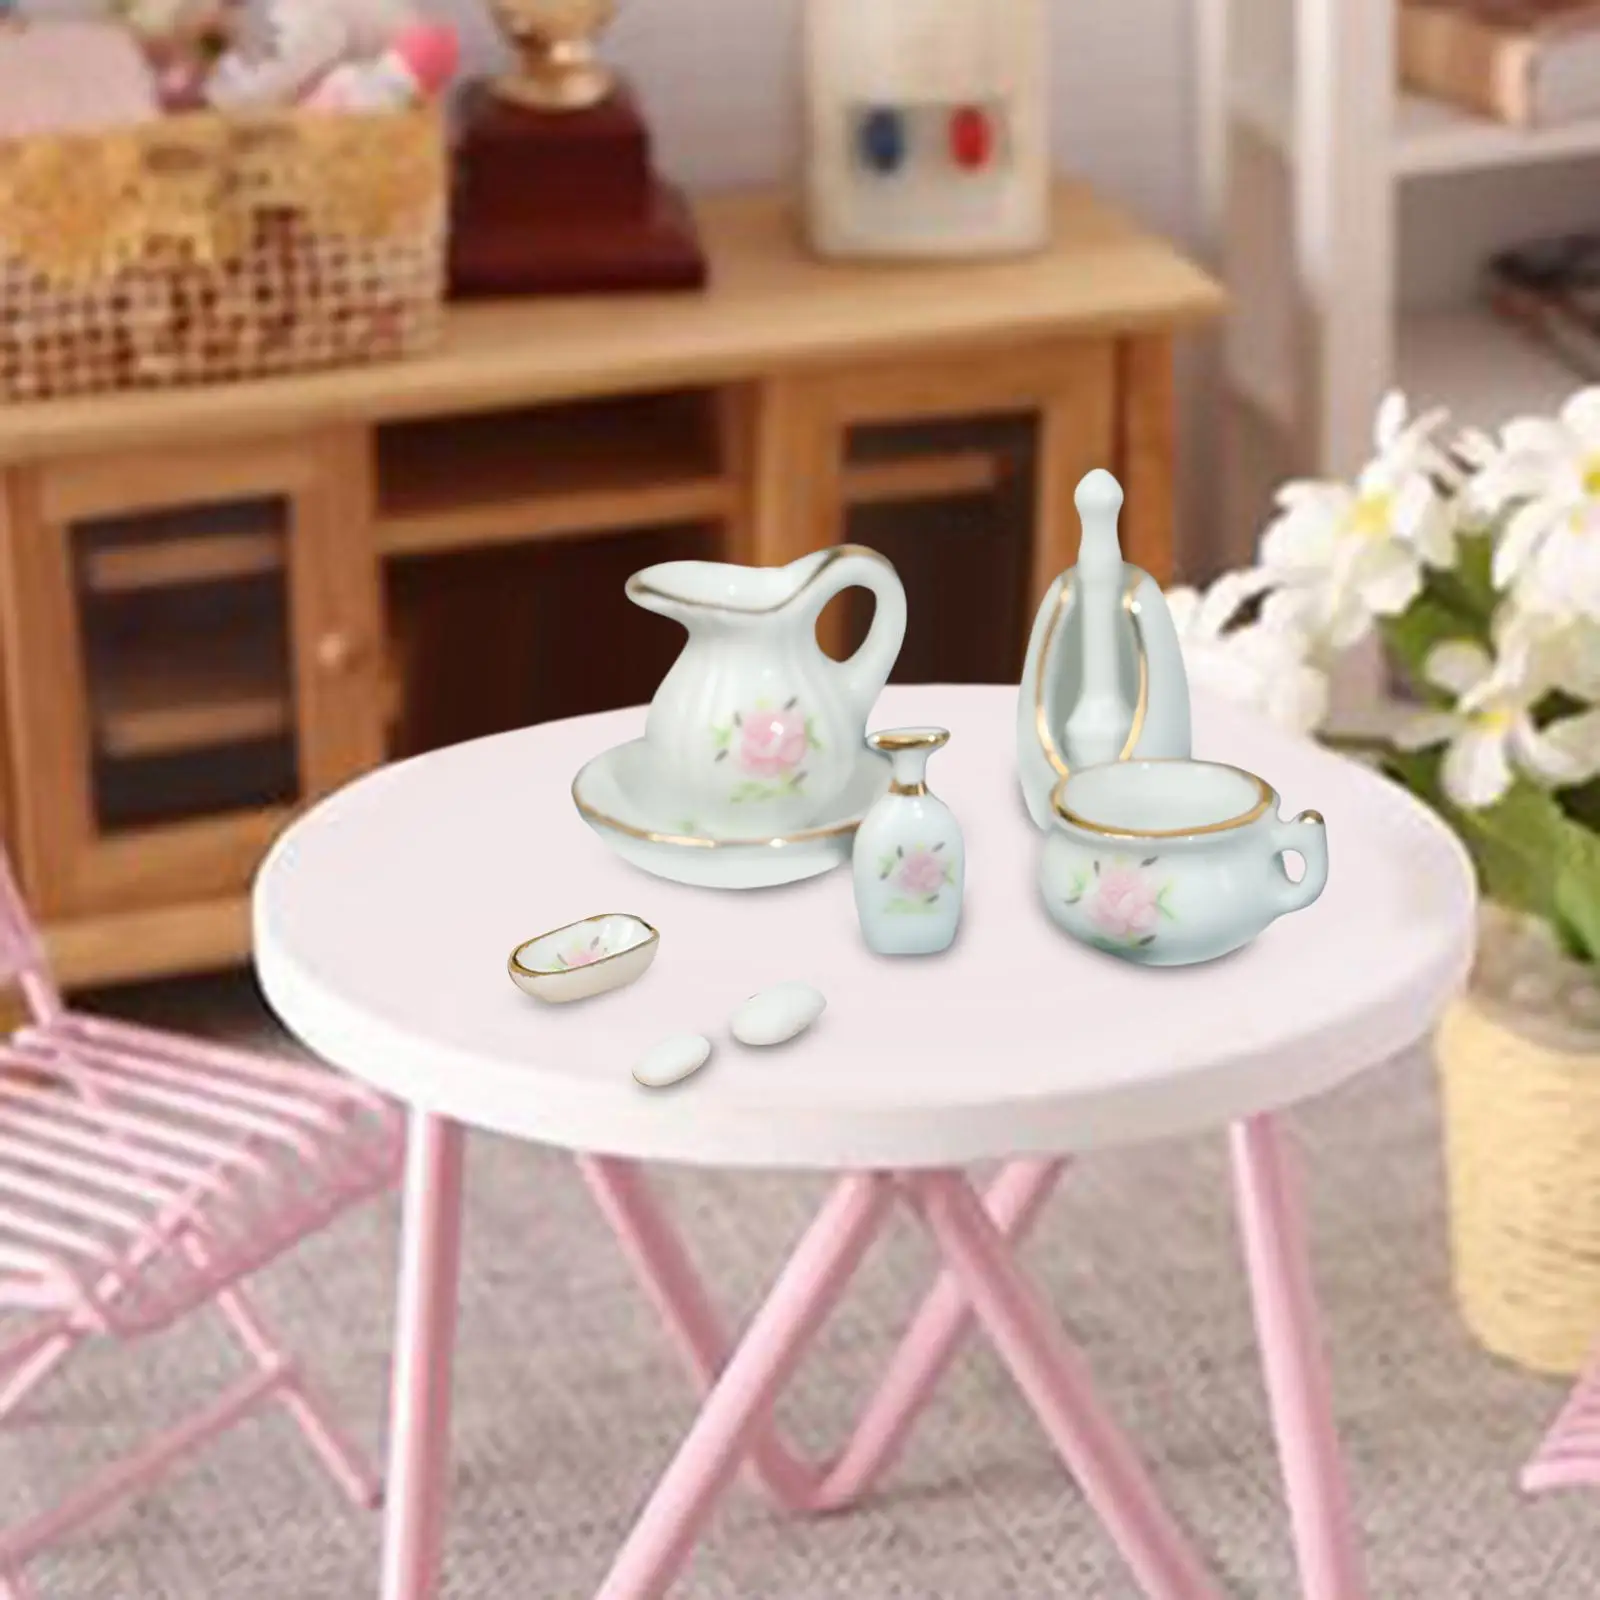 1/12 Dollhouse Furniture Accessories Mini Pots and Cup, Flower Vase, Soap, Soap Tray, Toilet Brush and Holder, and Storage Tray